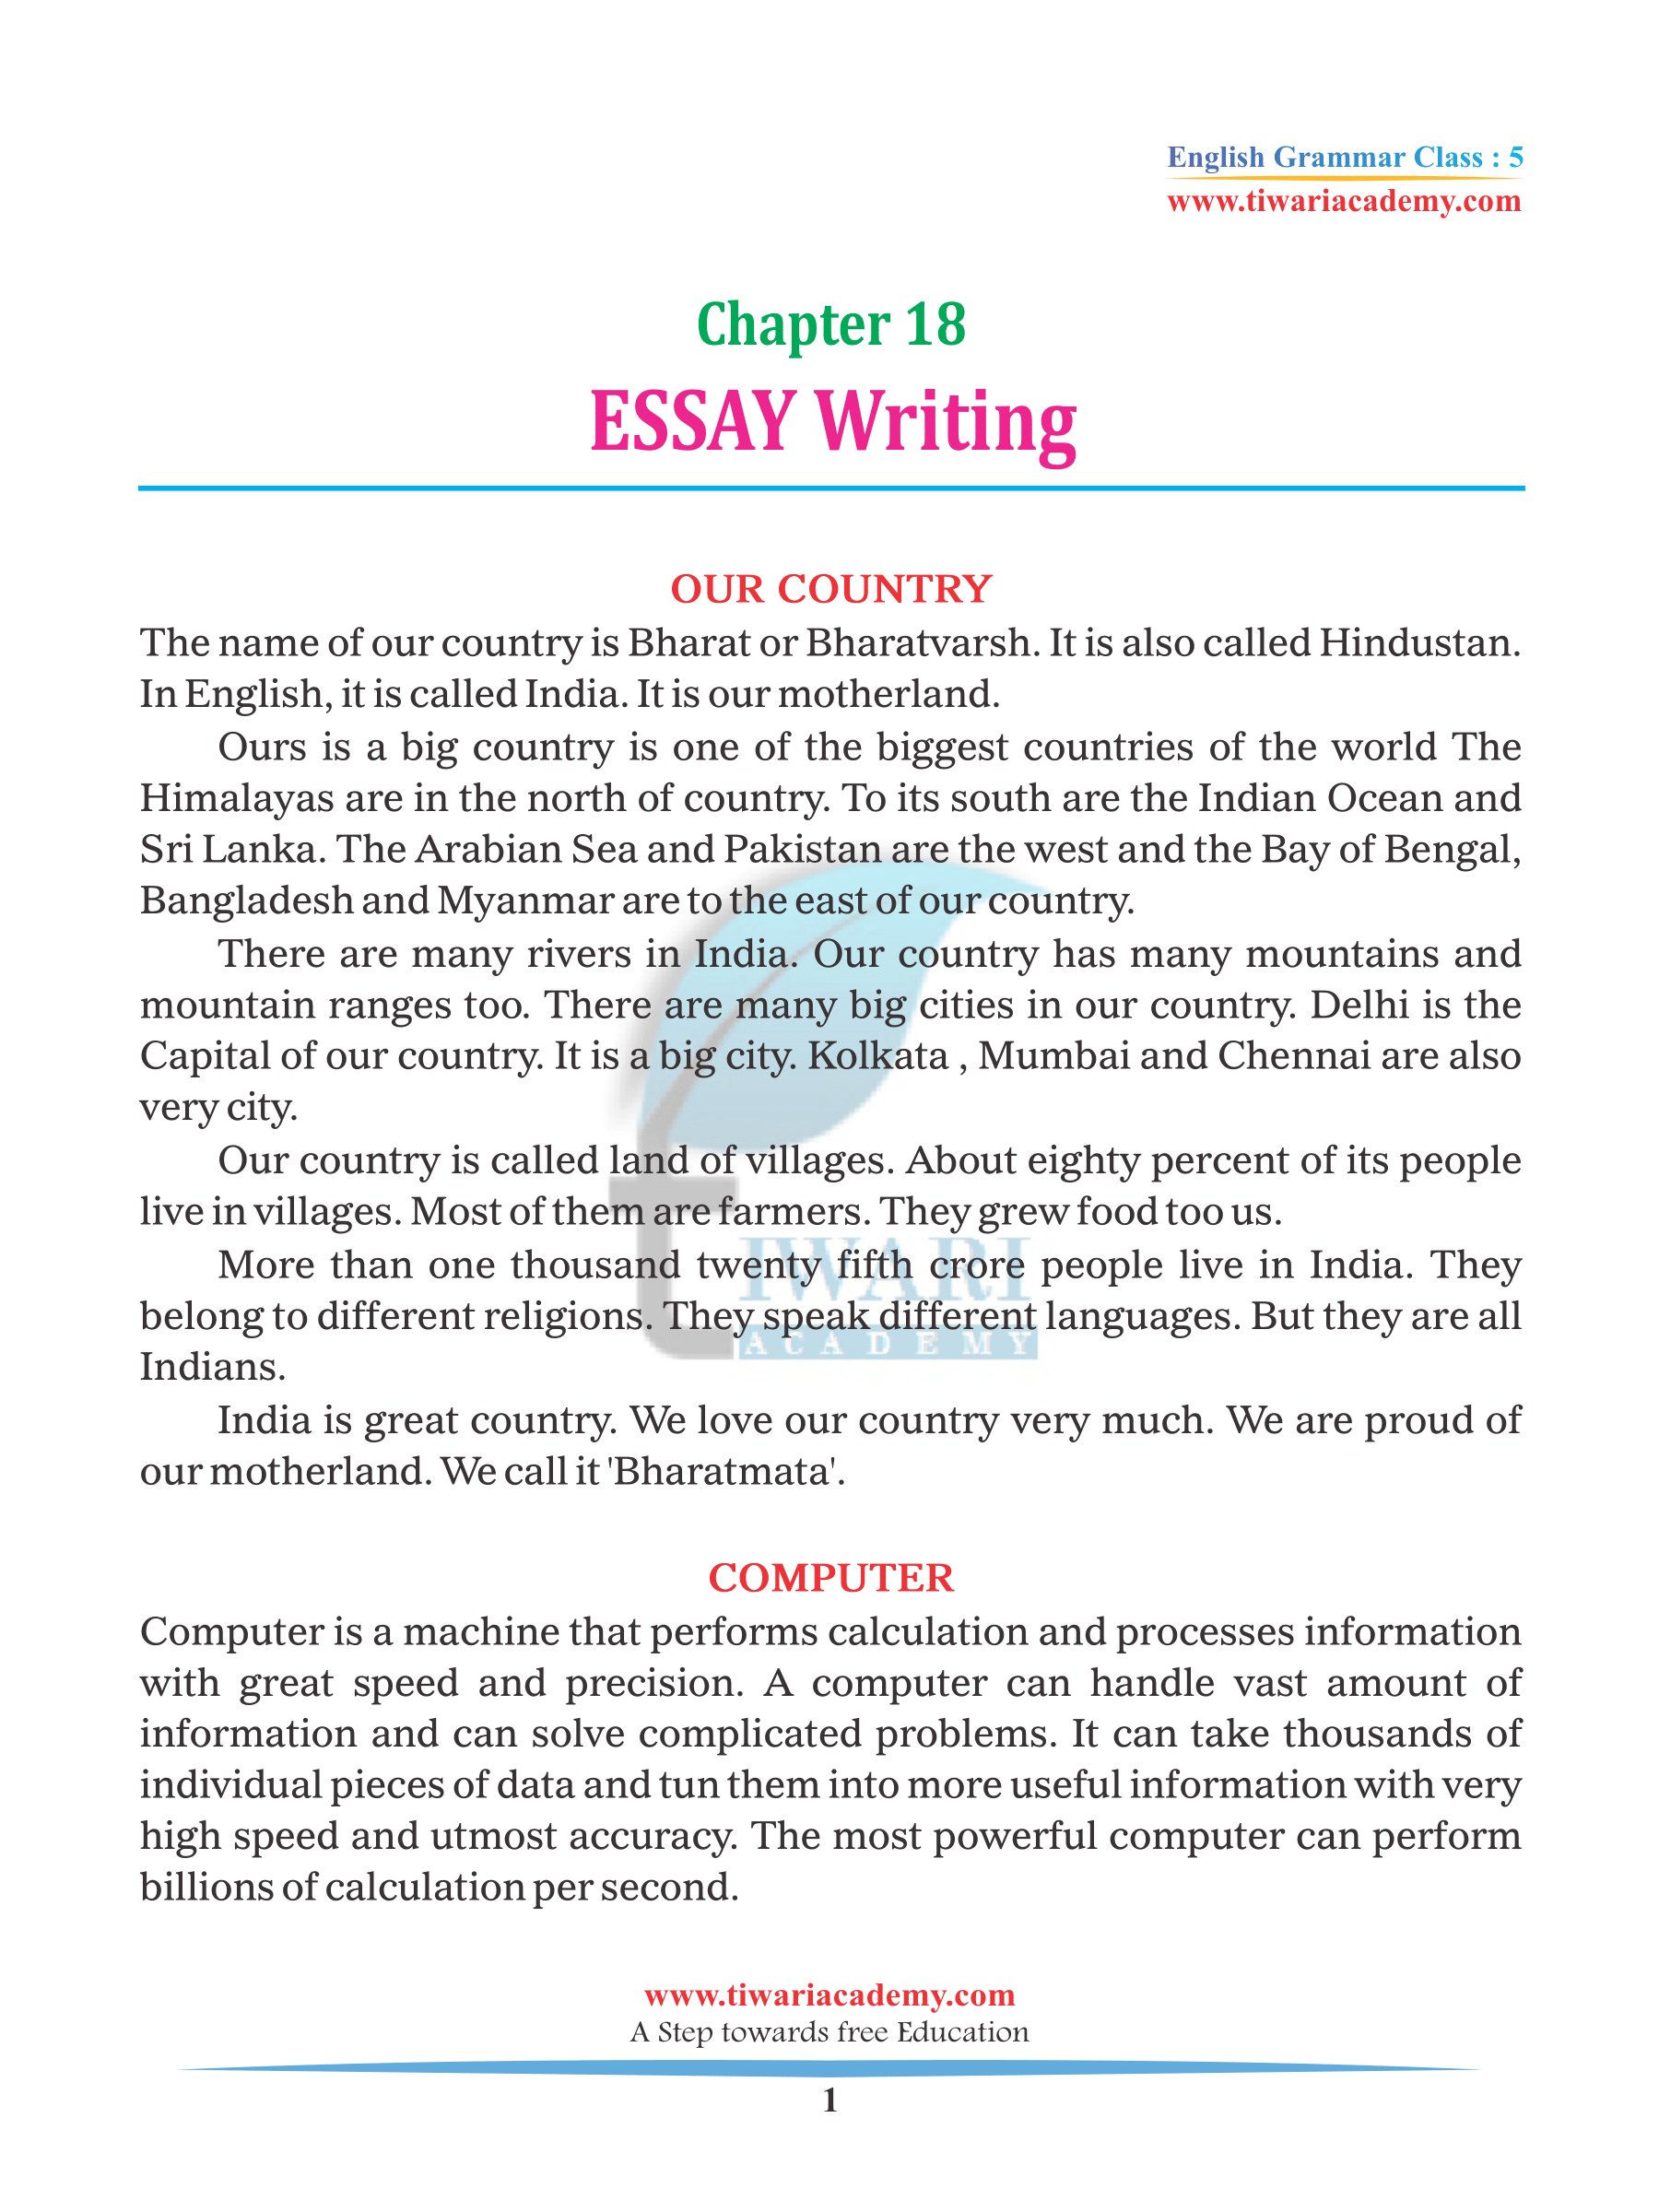 essay for class 5 in english pdf